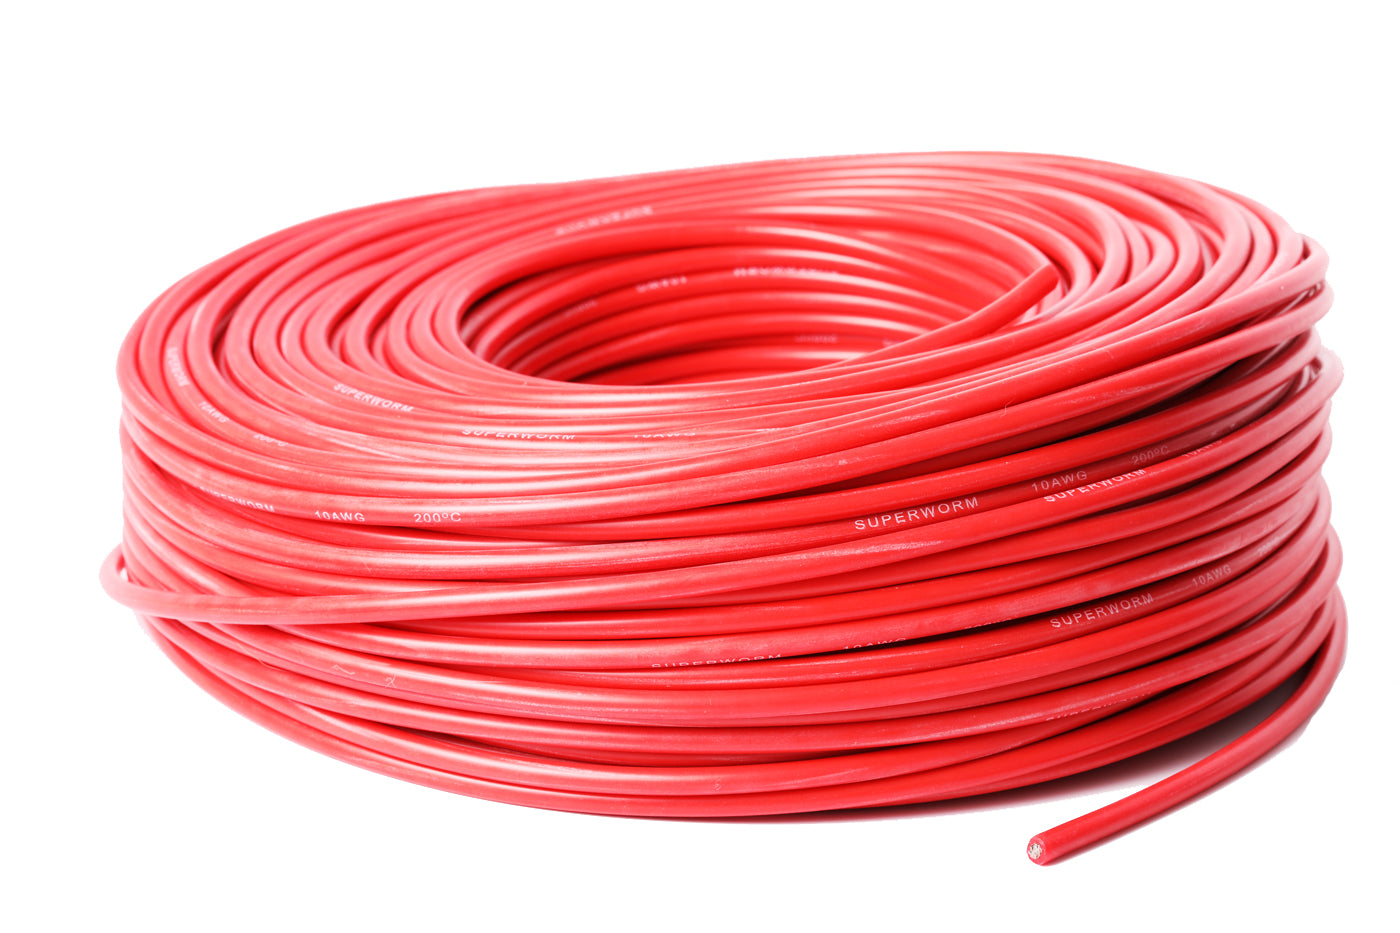 Silicone Wire 14AWG 14 Gauge Flexible Tinned Copper Standard  High-Temperature Hookup Wire Orange 12m/40ft